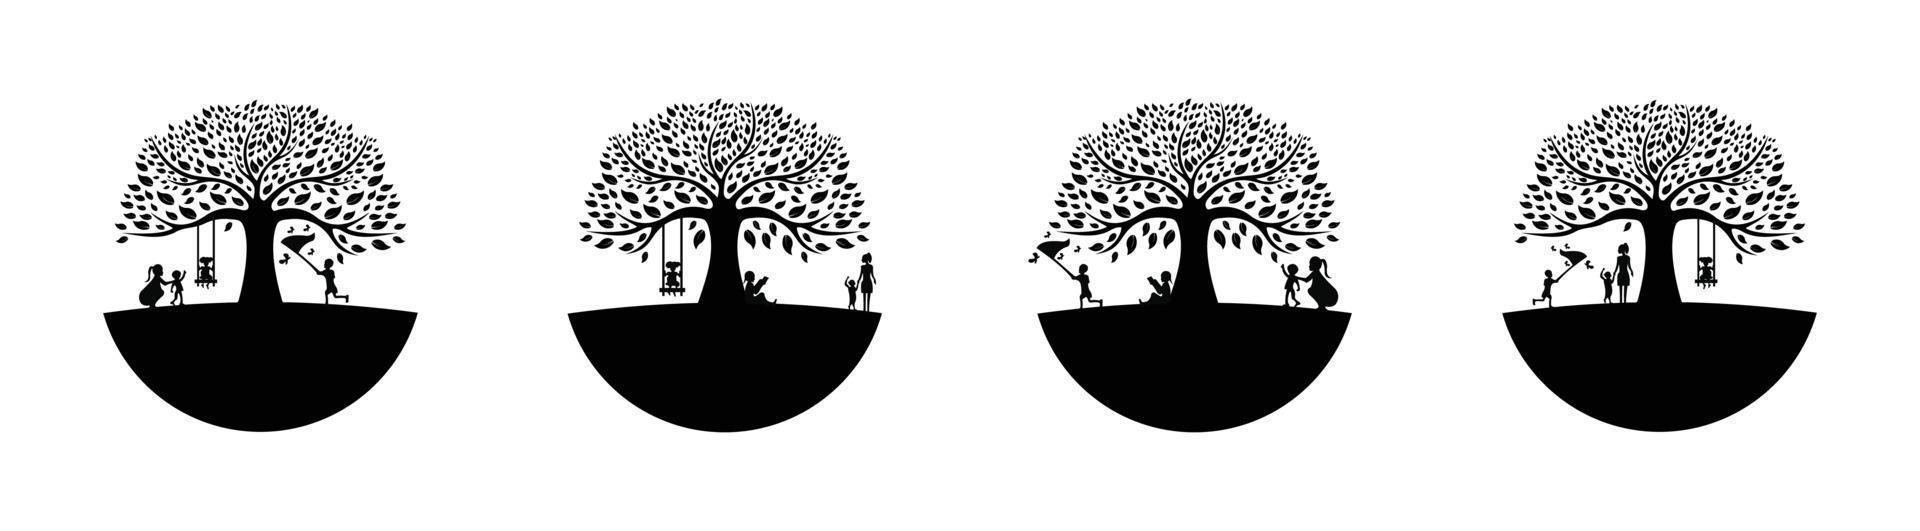 children and mothers play under the tree, black oak tree logo and roots design vector illustration